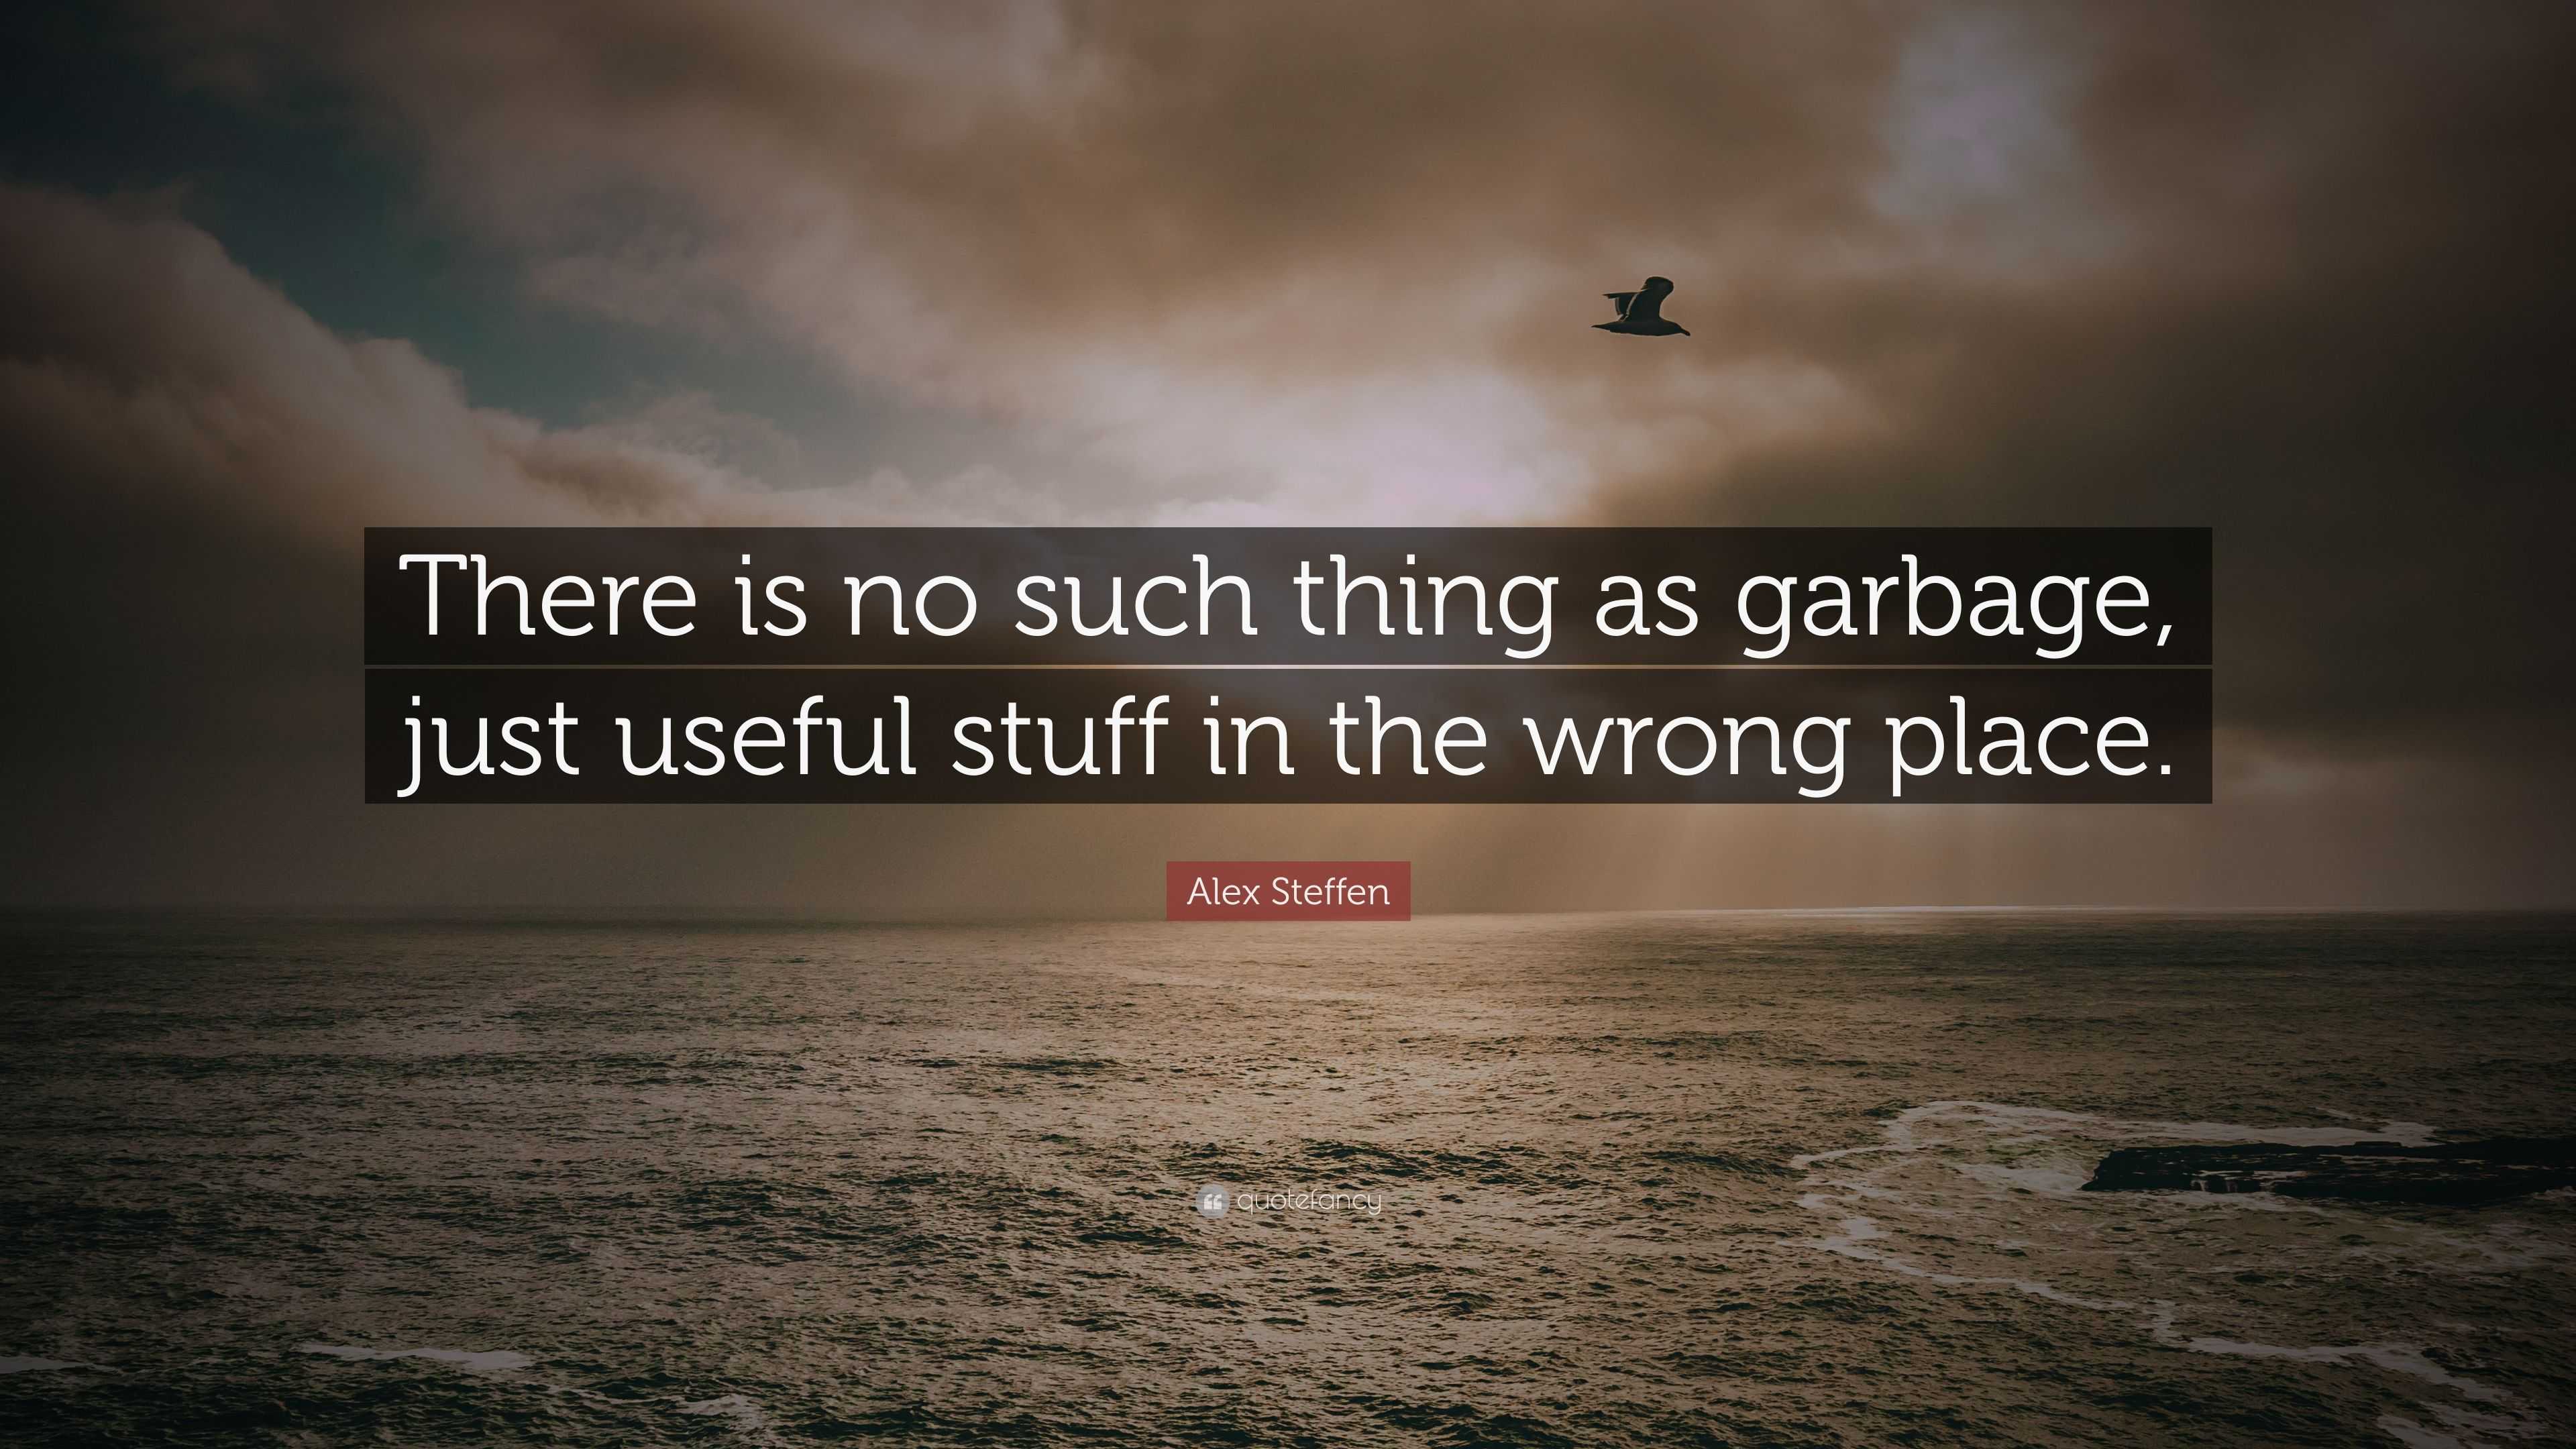 https://quotefancy.com/media/wallpaper/3840x2160/5243891-Alex-Steffen-Quote-There-is-no-such-thing-as-garbage-just-useful.jpg